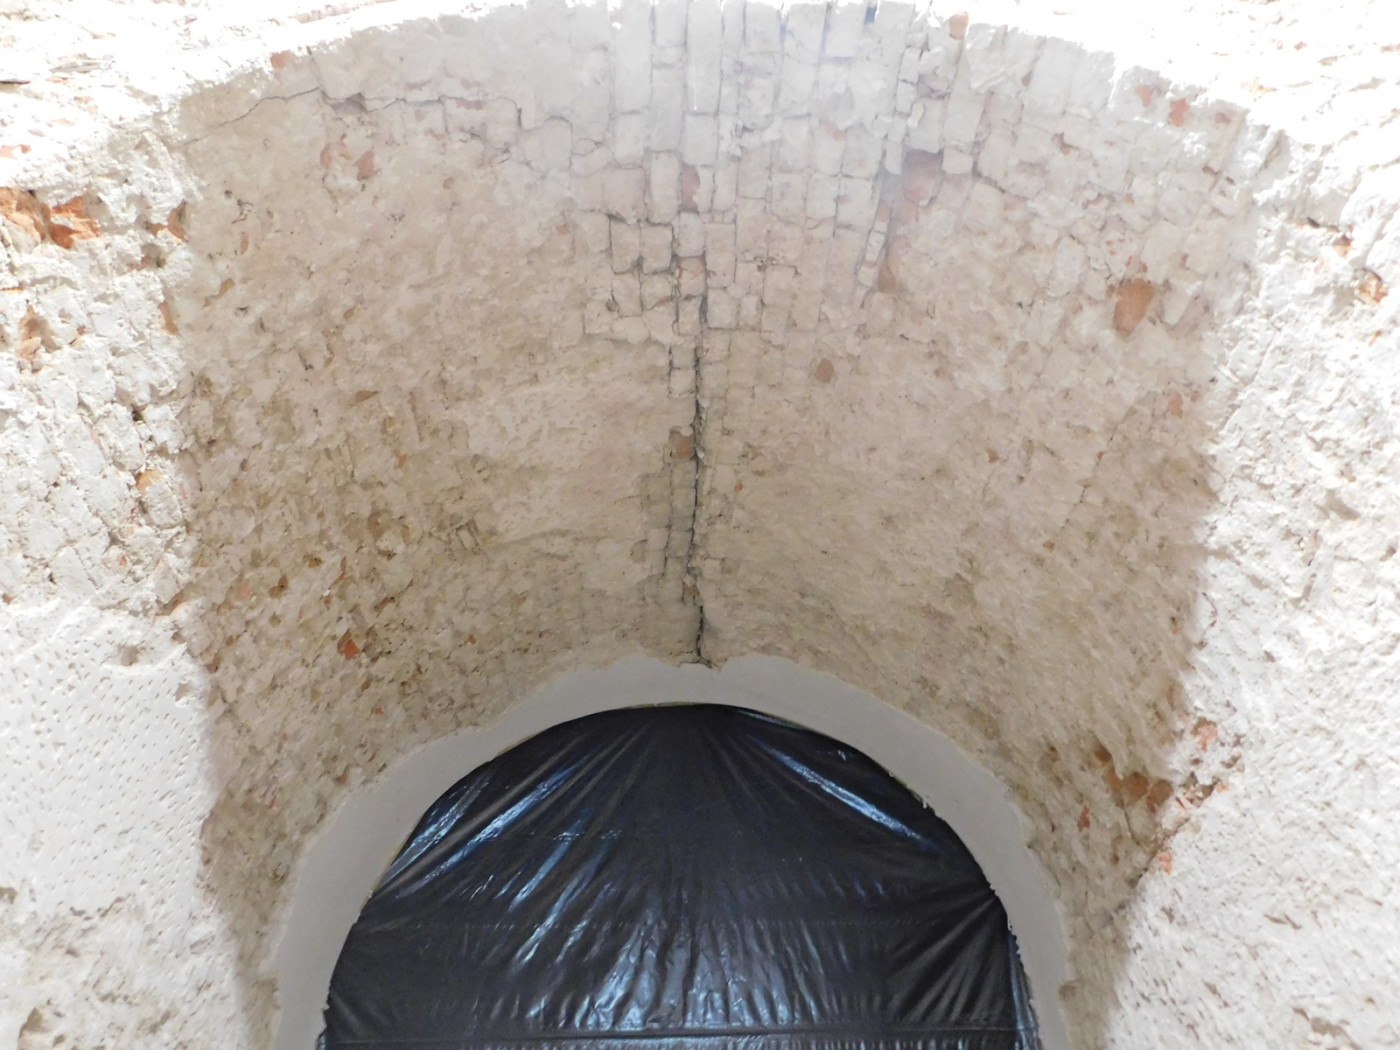 Monastery complex of the Order of Discalced Carmelites in Berdyczów, Condition of the vaults of the lower church after the unveiling